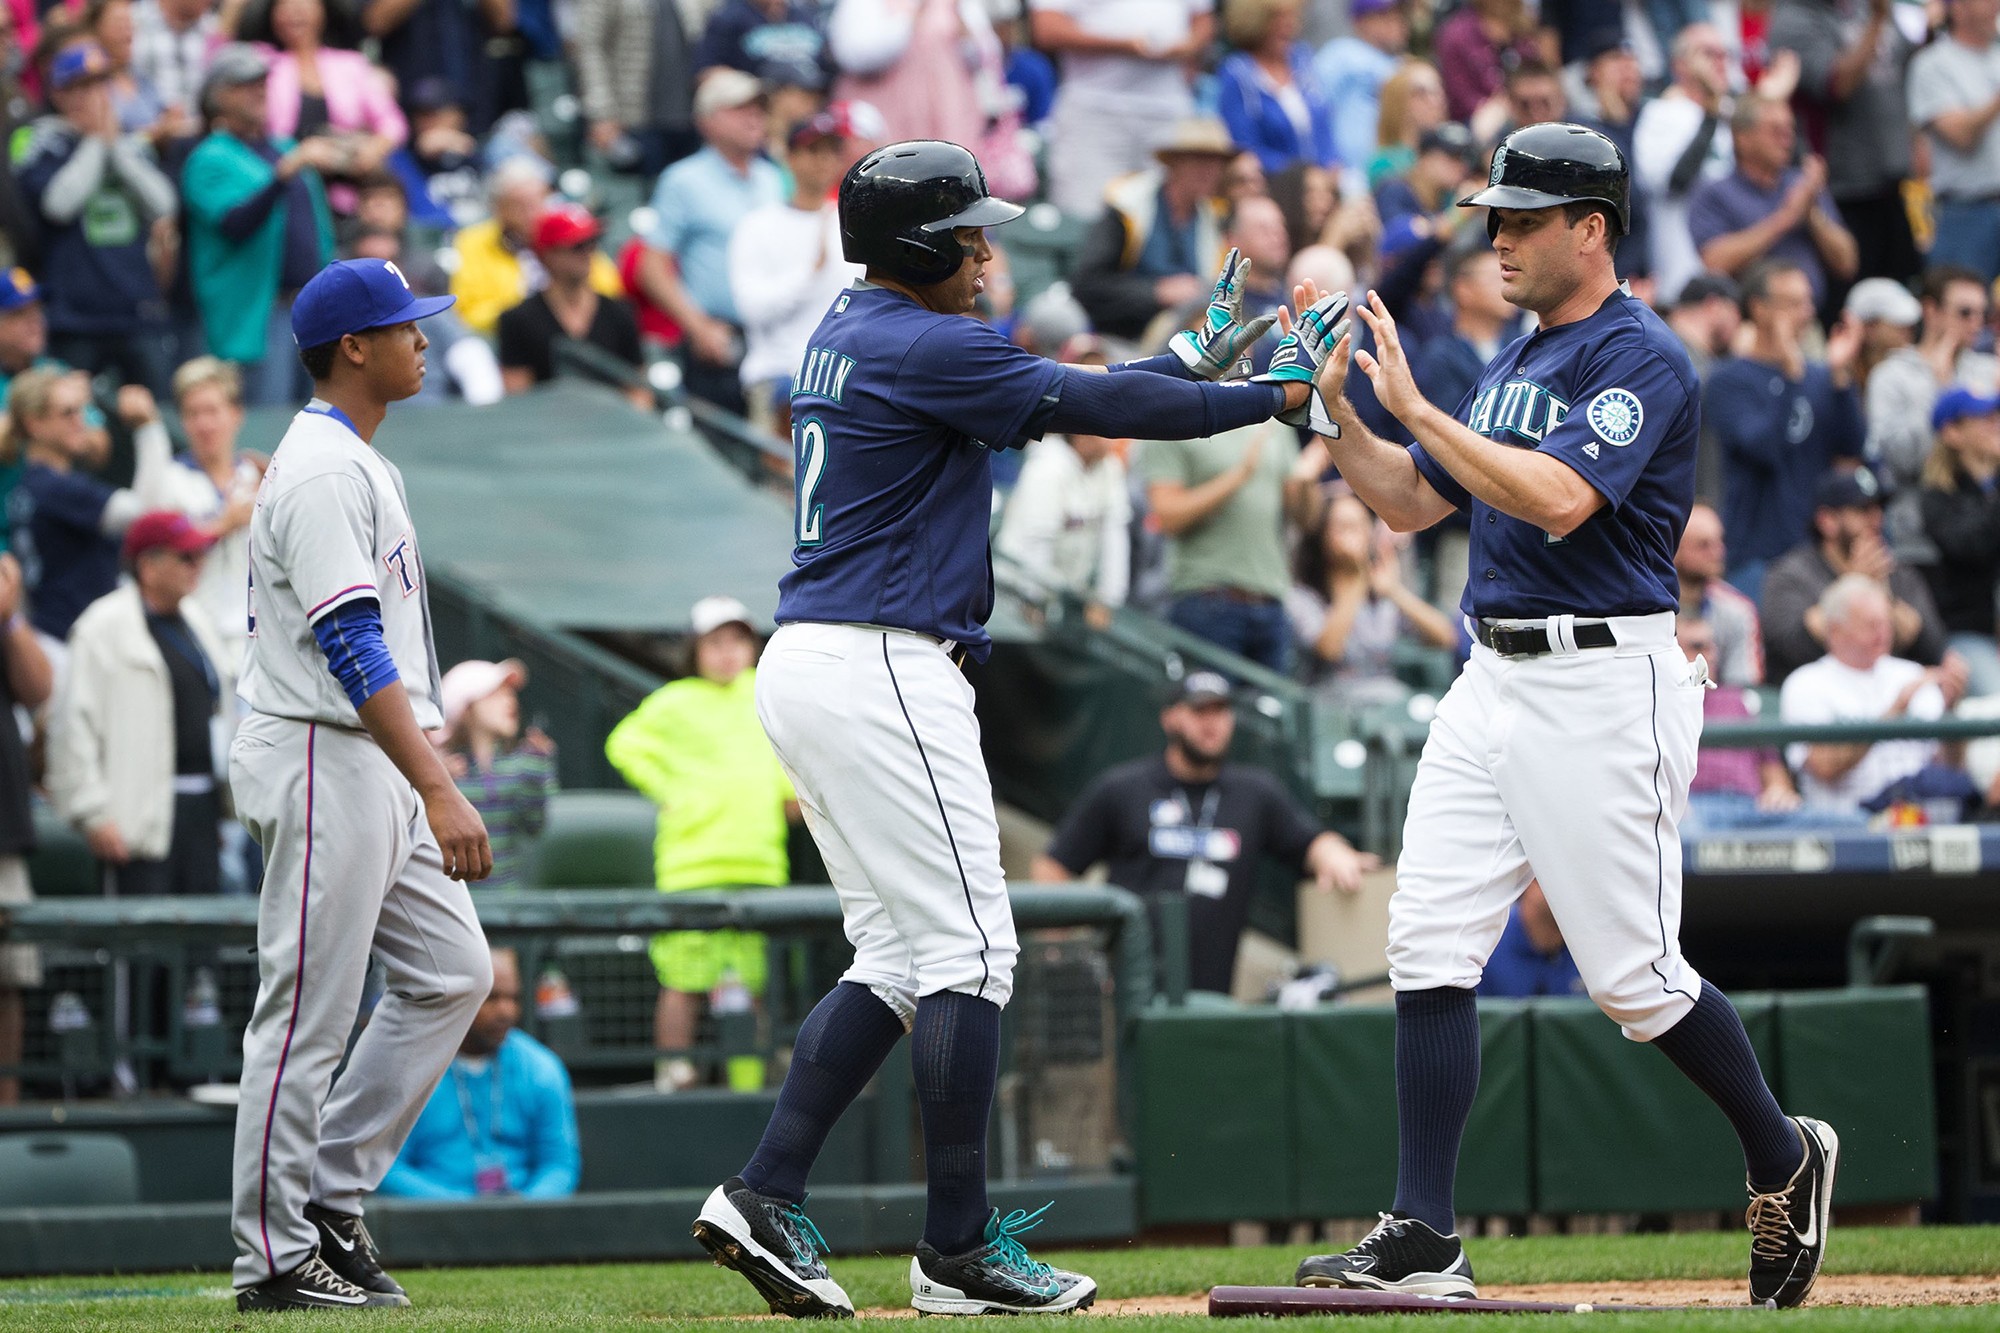 Mariners jump on Cole Hamels early to post a 14-6 victory over the Rangers